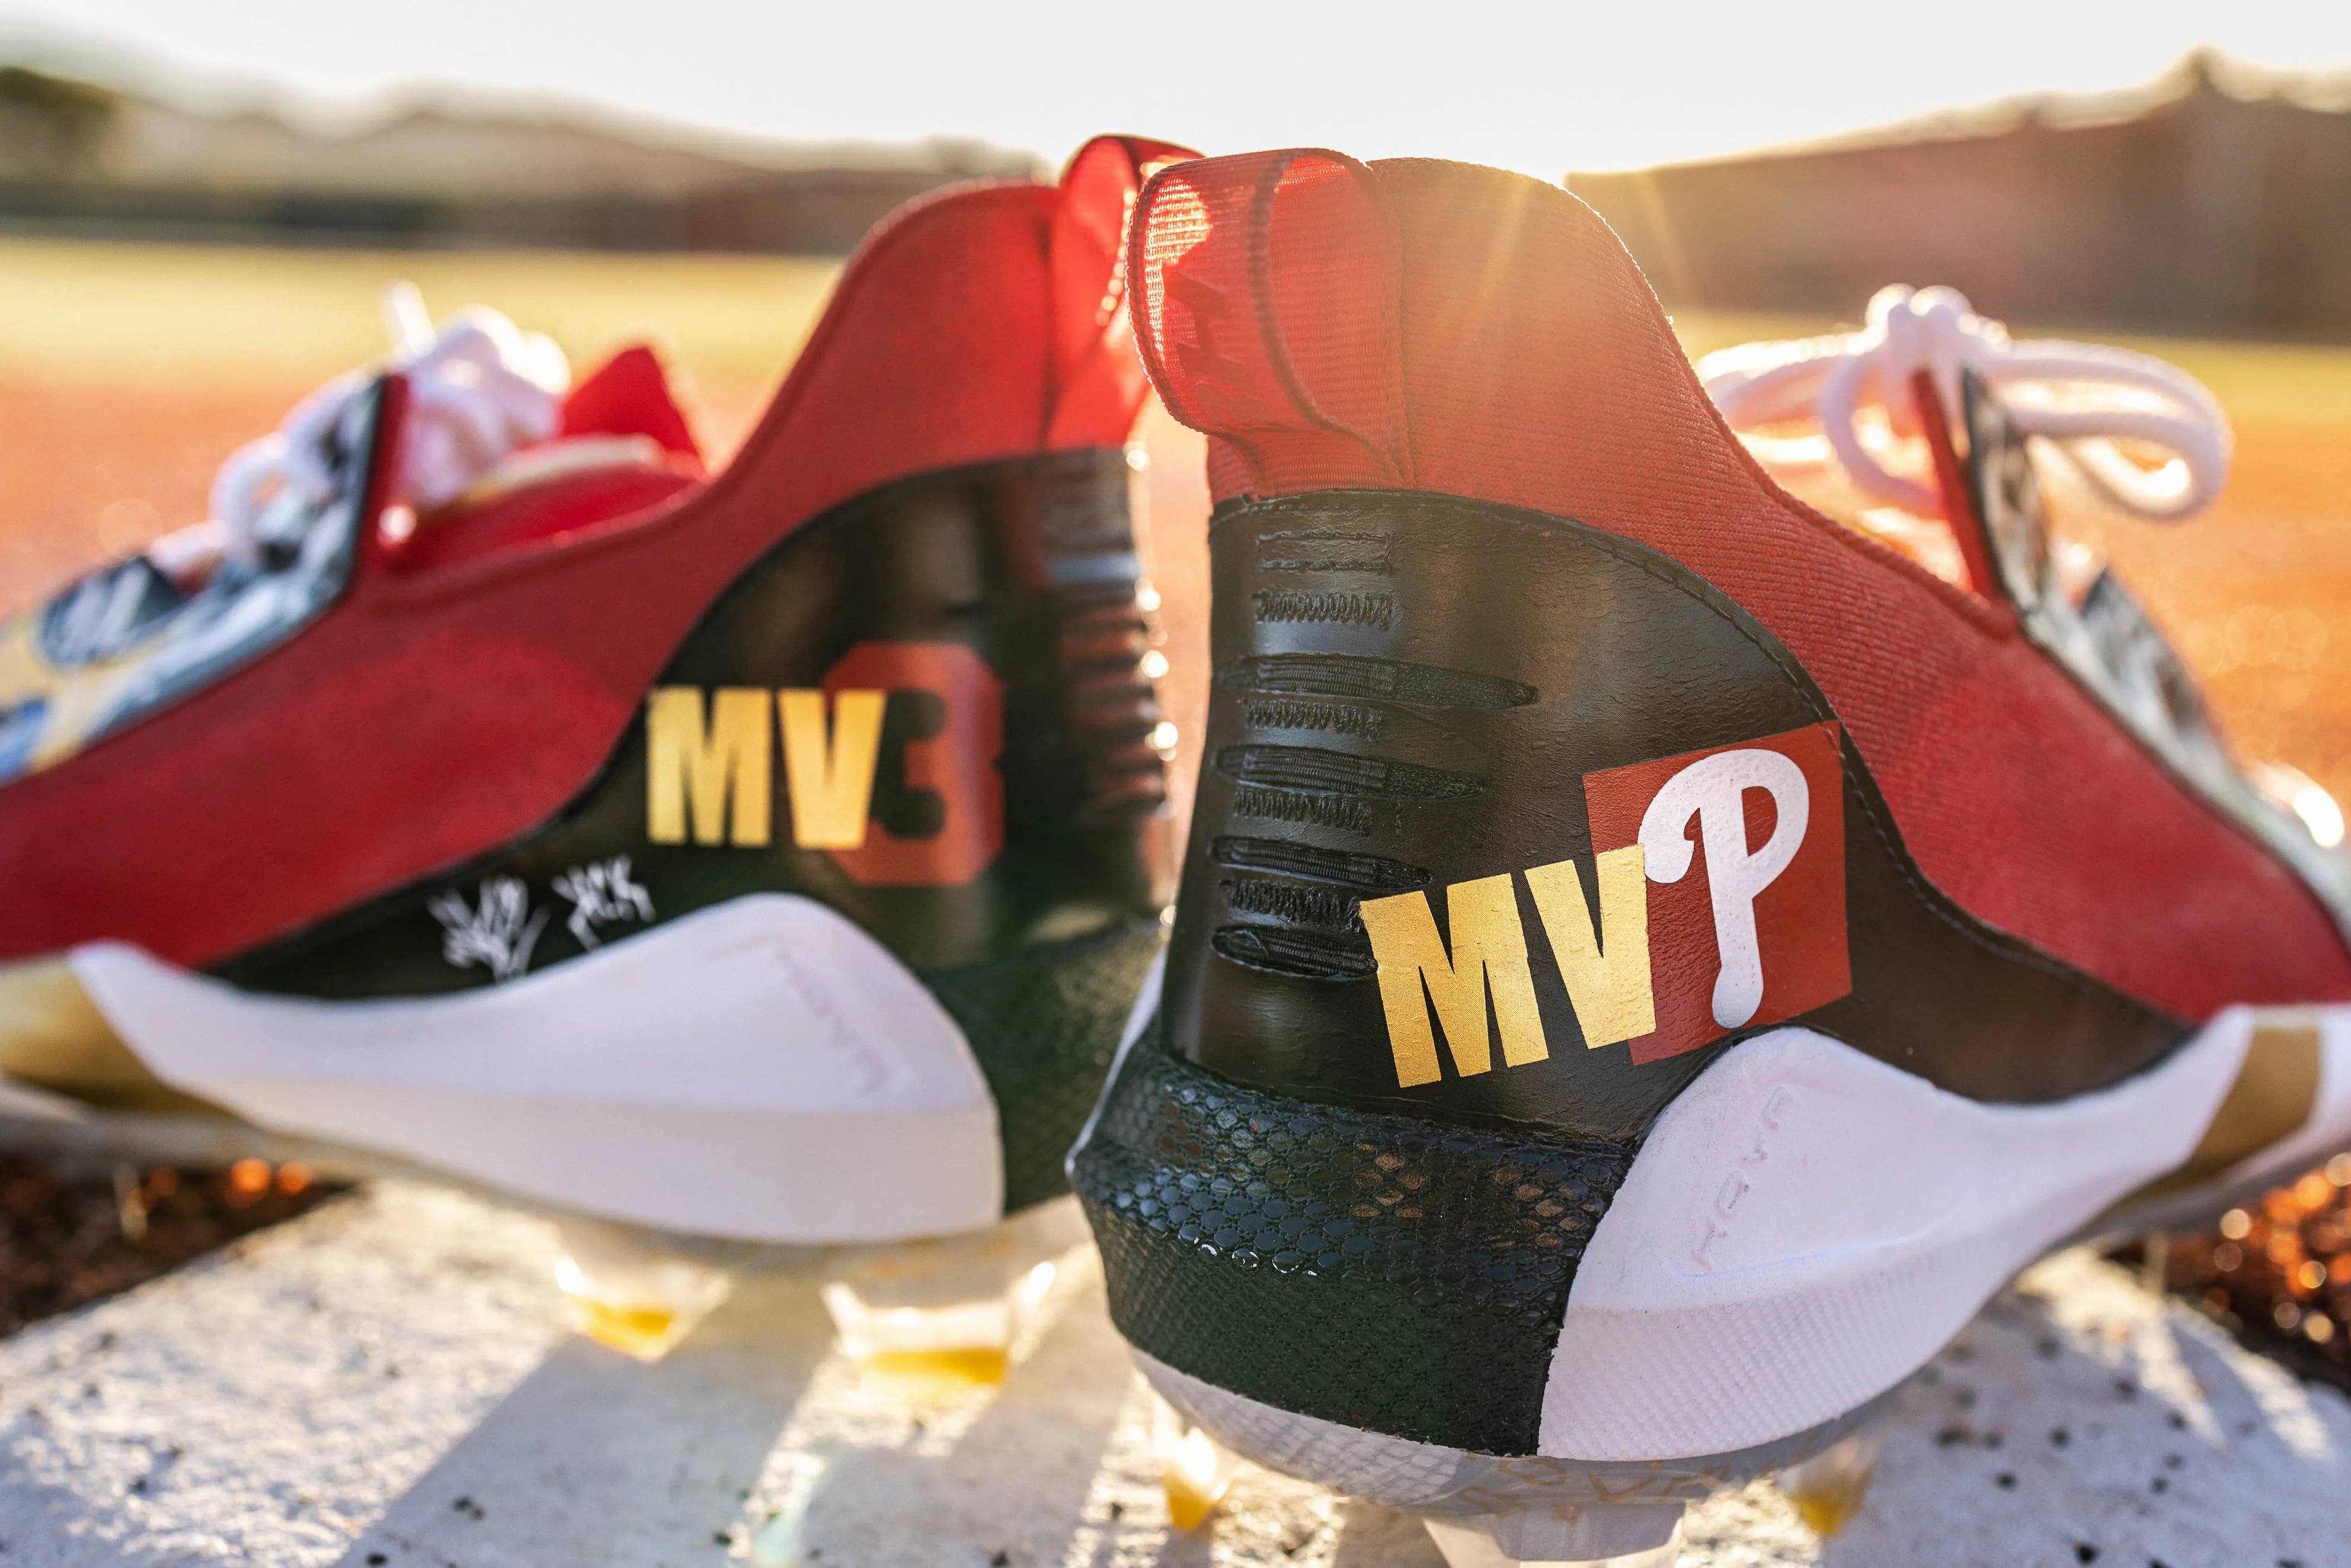 Bryce Harper debuted his custom Las Vegas cleats and promptly got